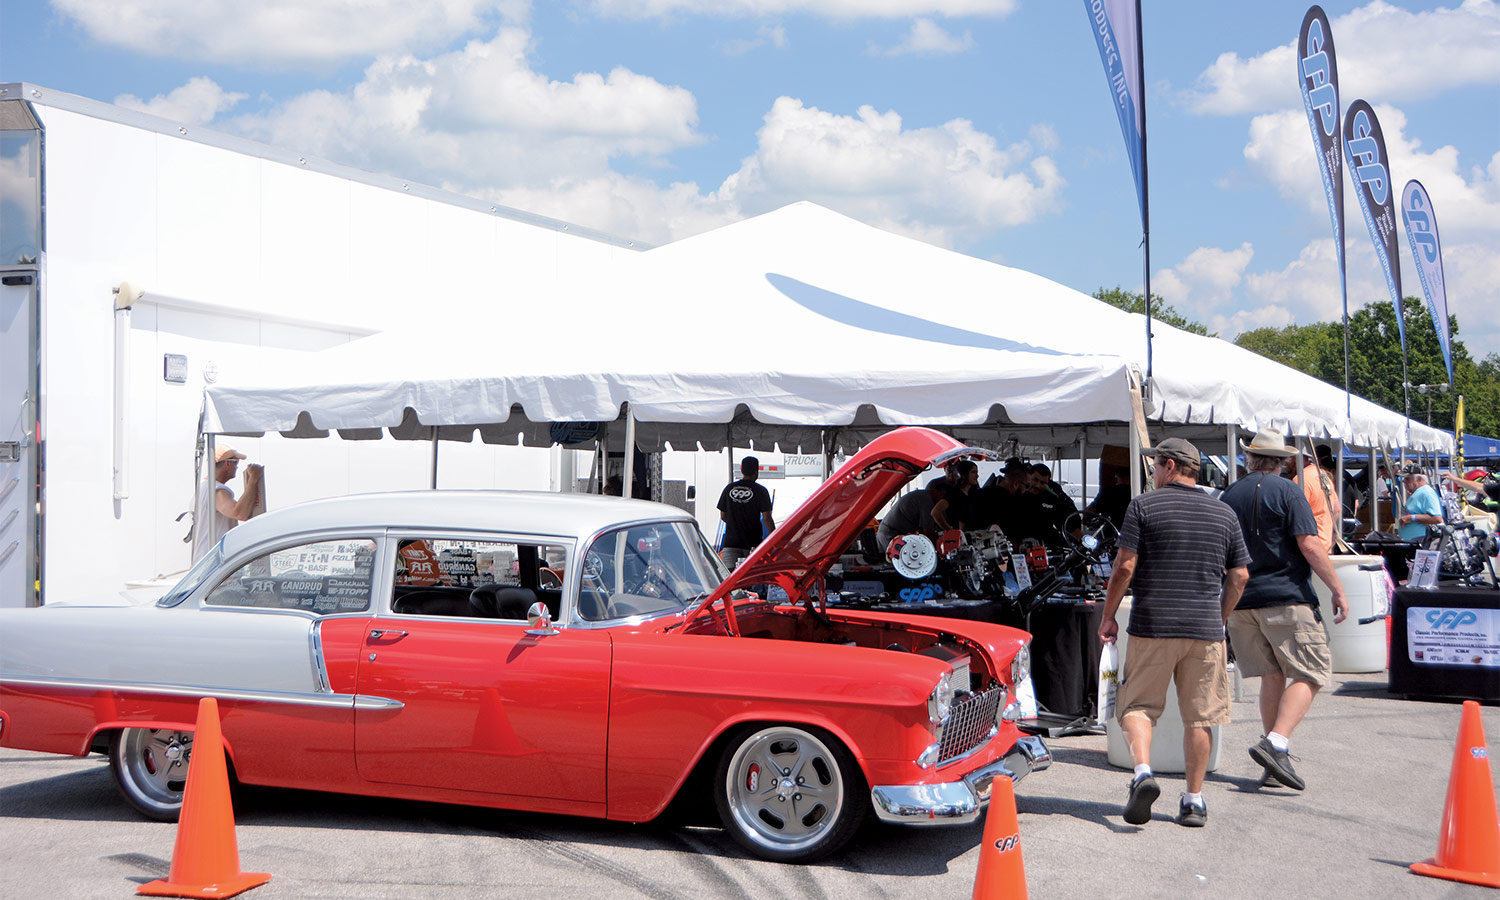 A red and white chevy in front of a vendor tent